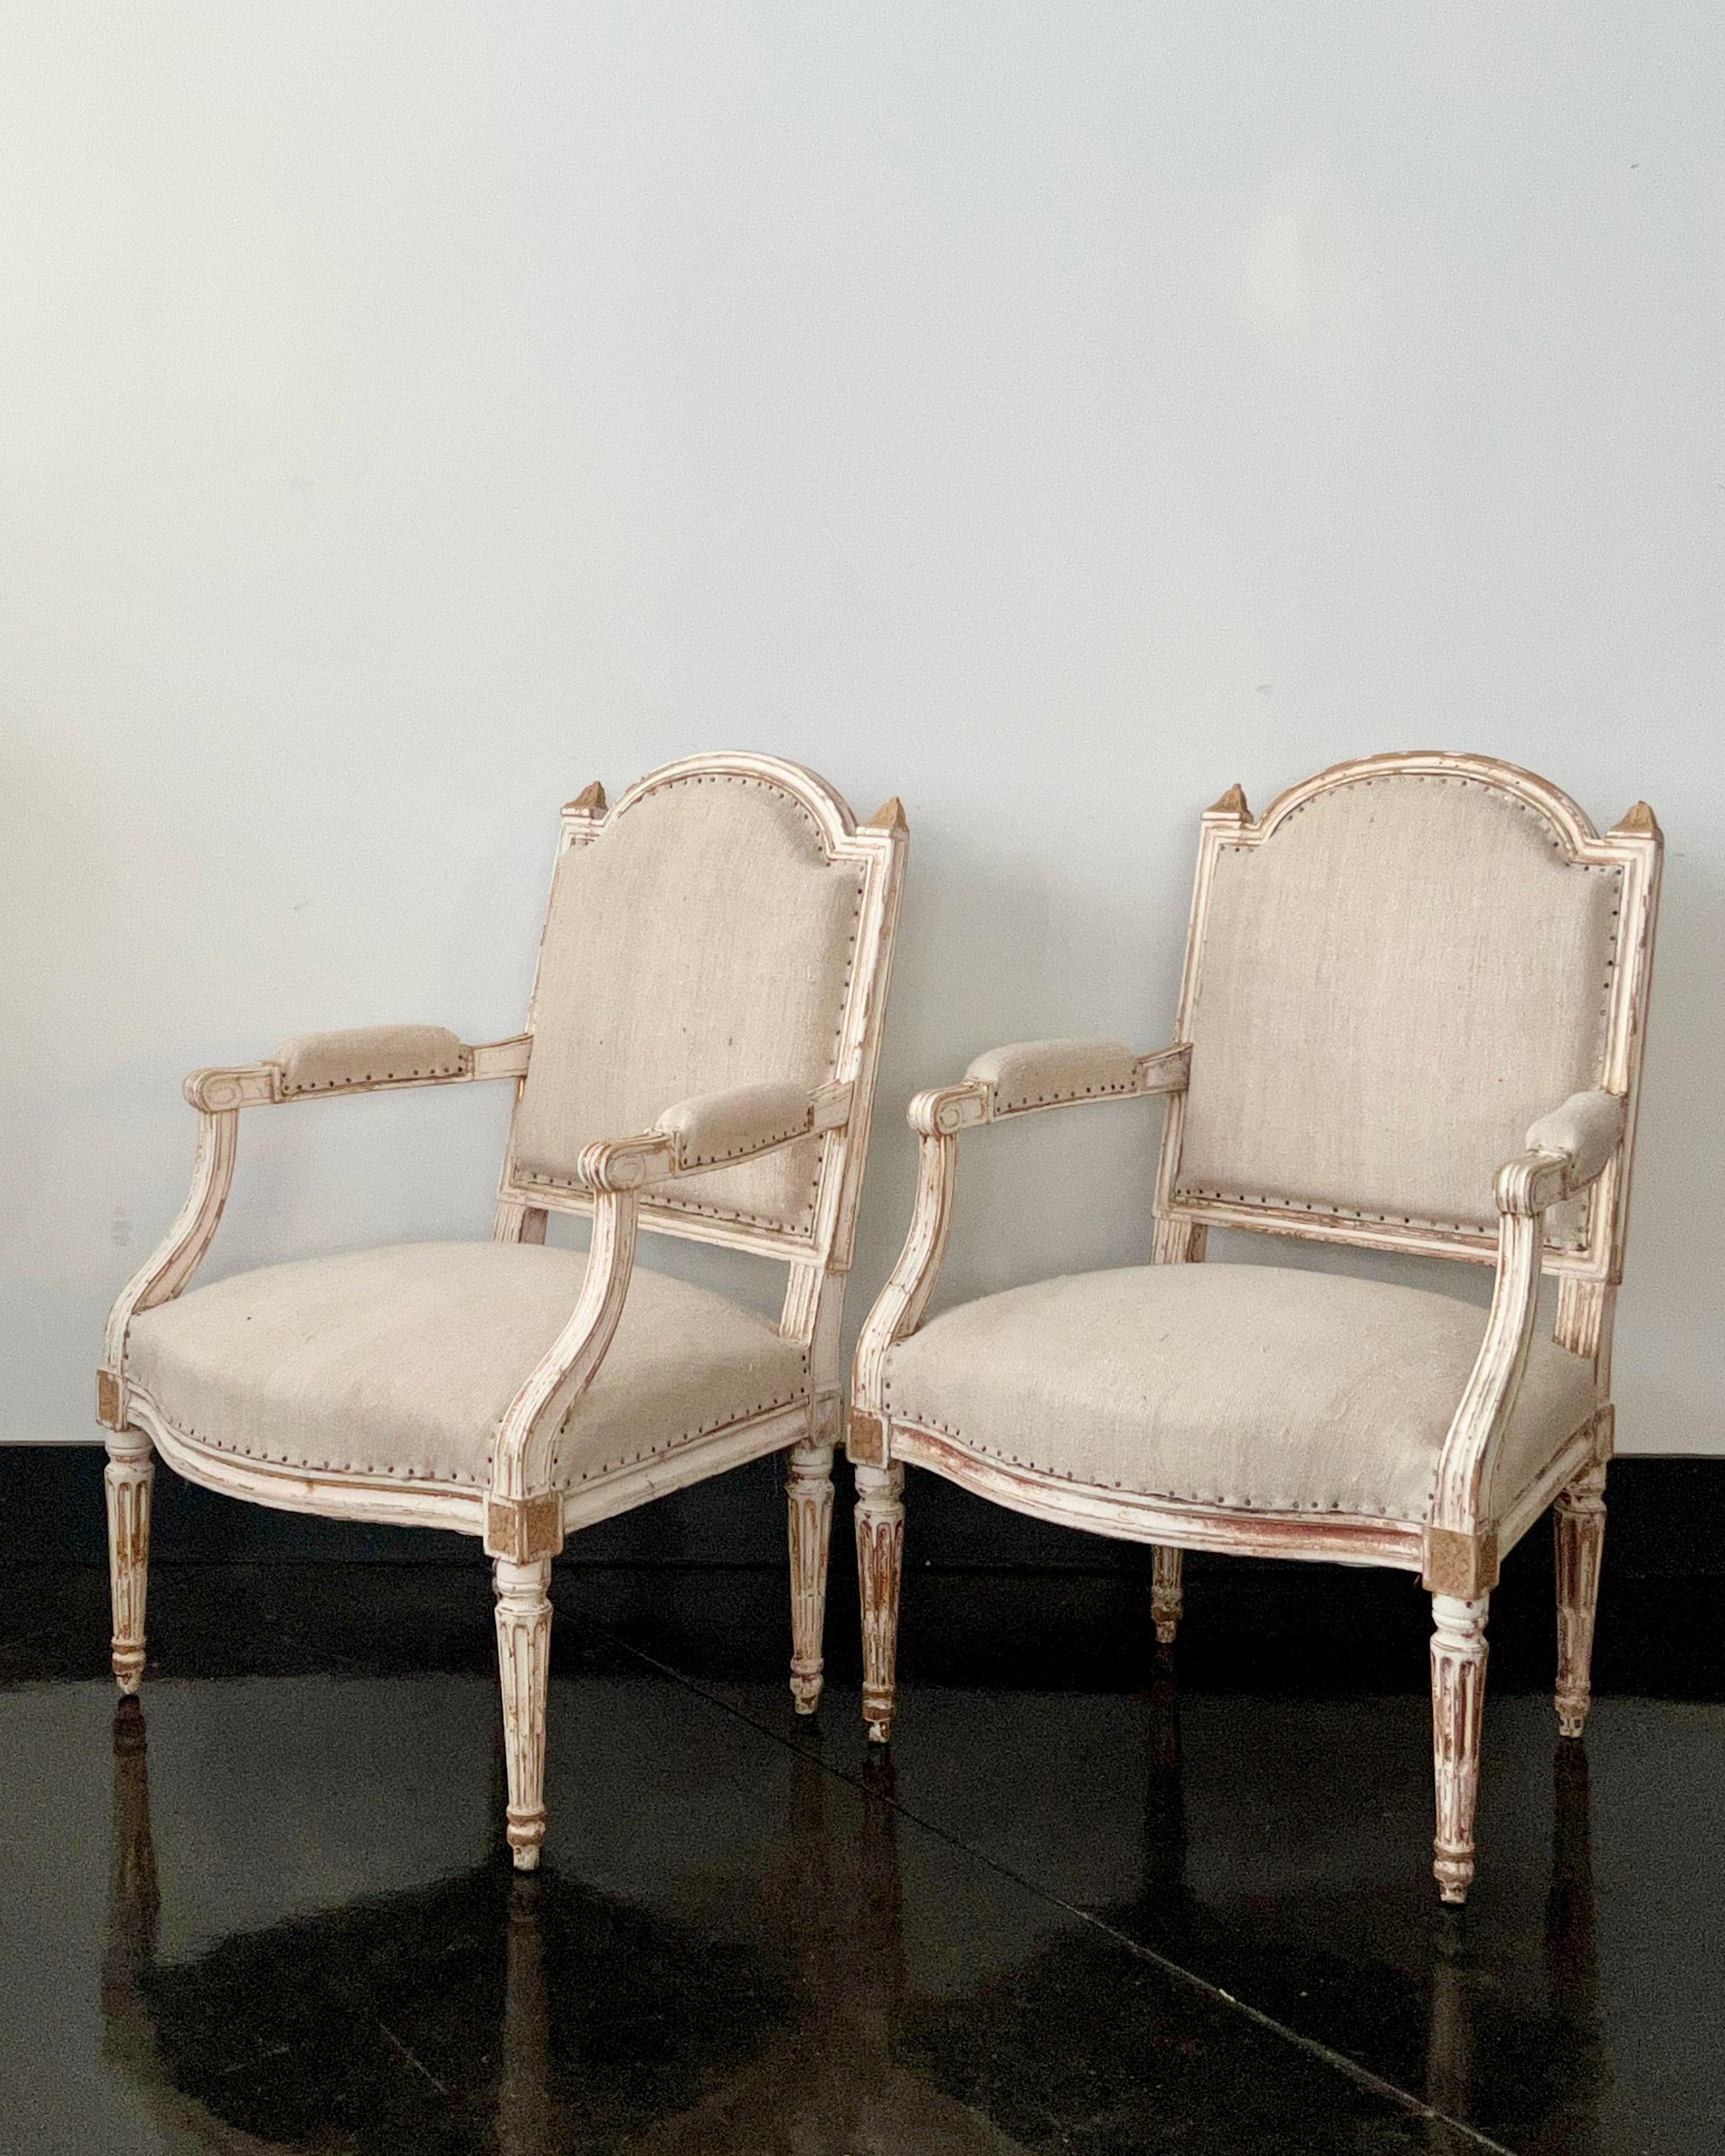 A pair of French painted fauteuils in Louis XVI style carved solid wood frame with fauteuils raised on four fluted tapering legs accented with carved rosettes on the joints - showing some places fragments of original gilt wood.
Upholstered in raw